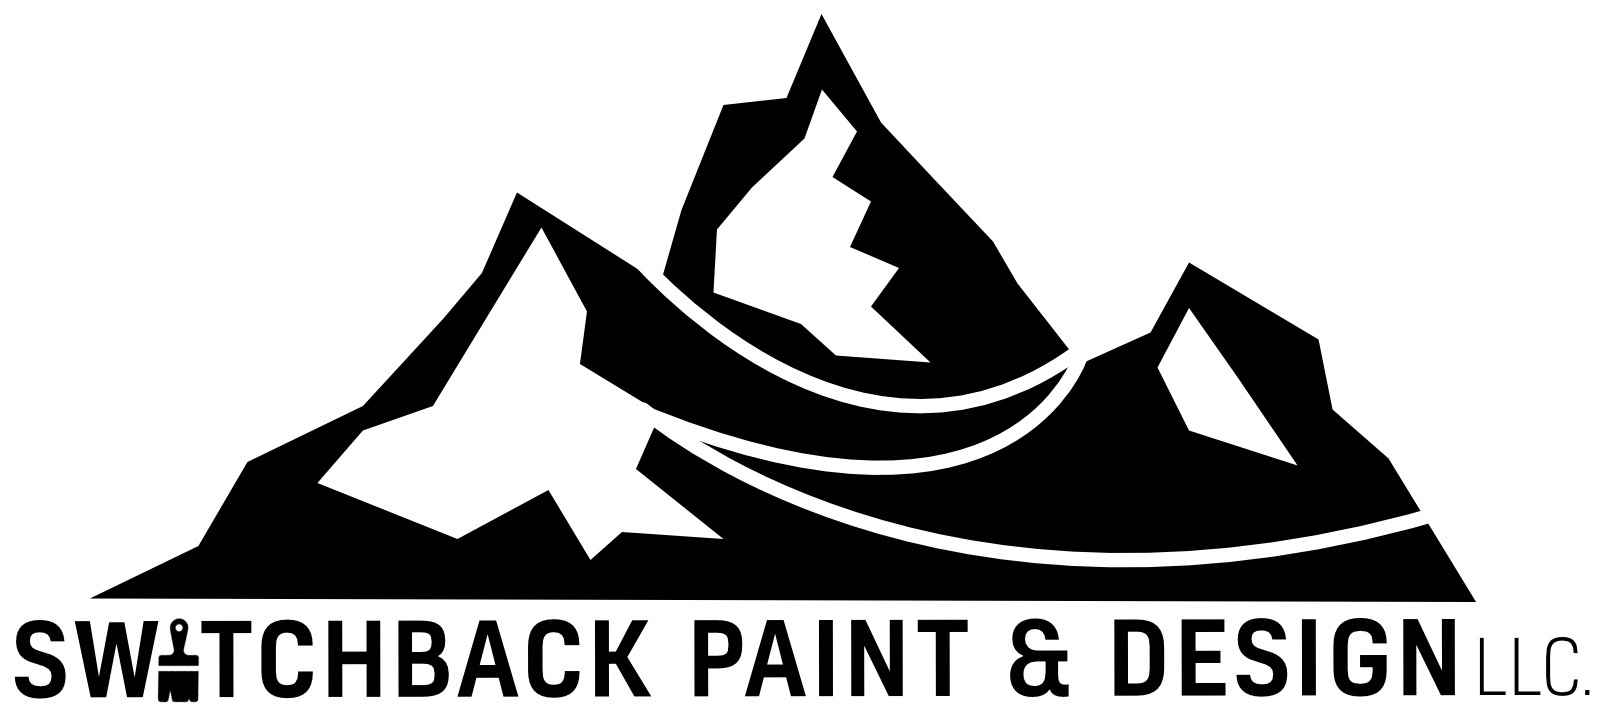 Switchback Paint and Design Ltd.